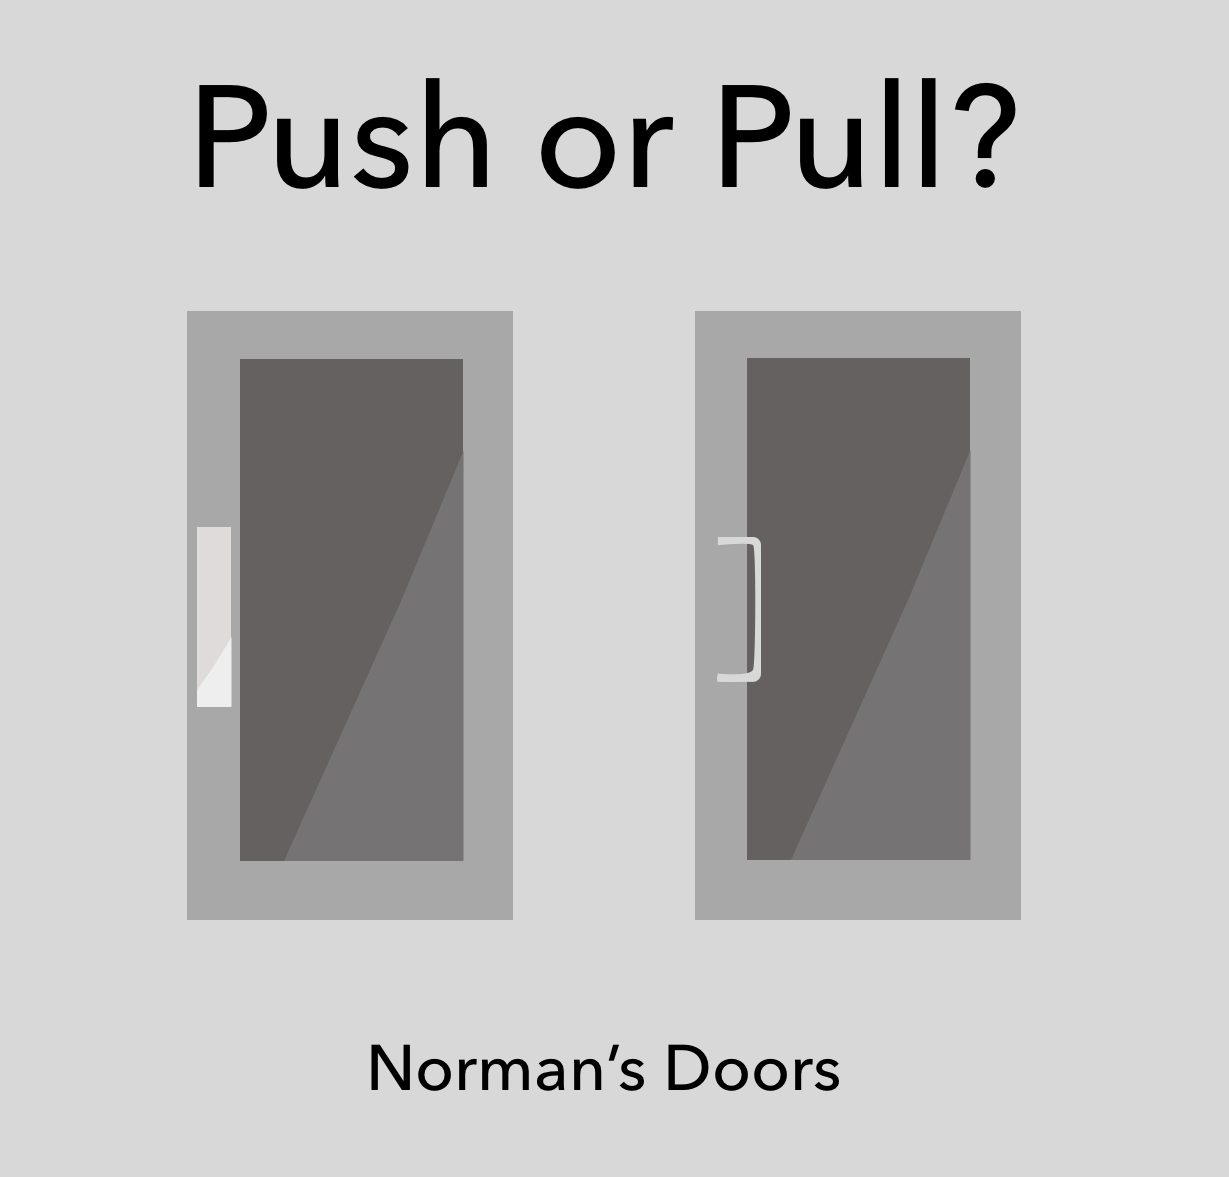 Norman’s Doors as Bad System Design